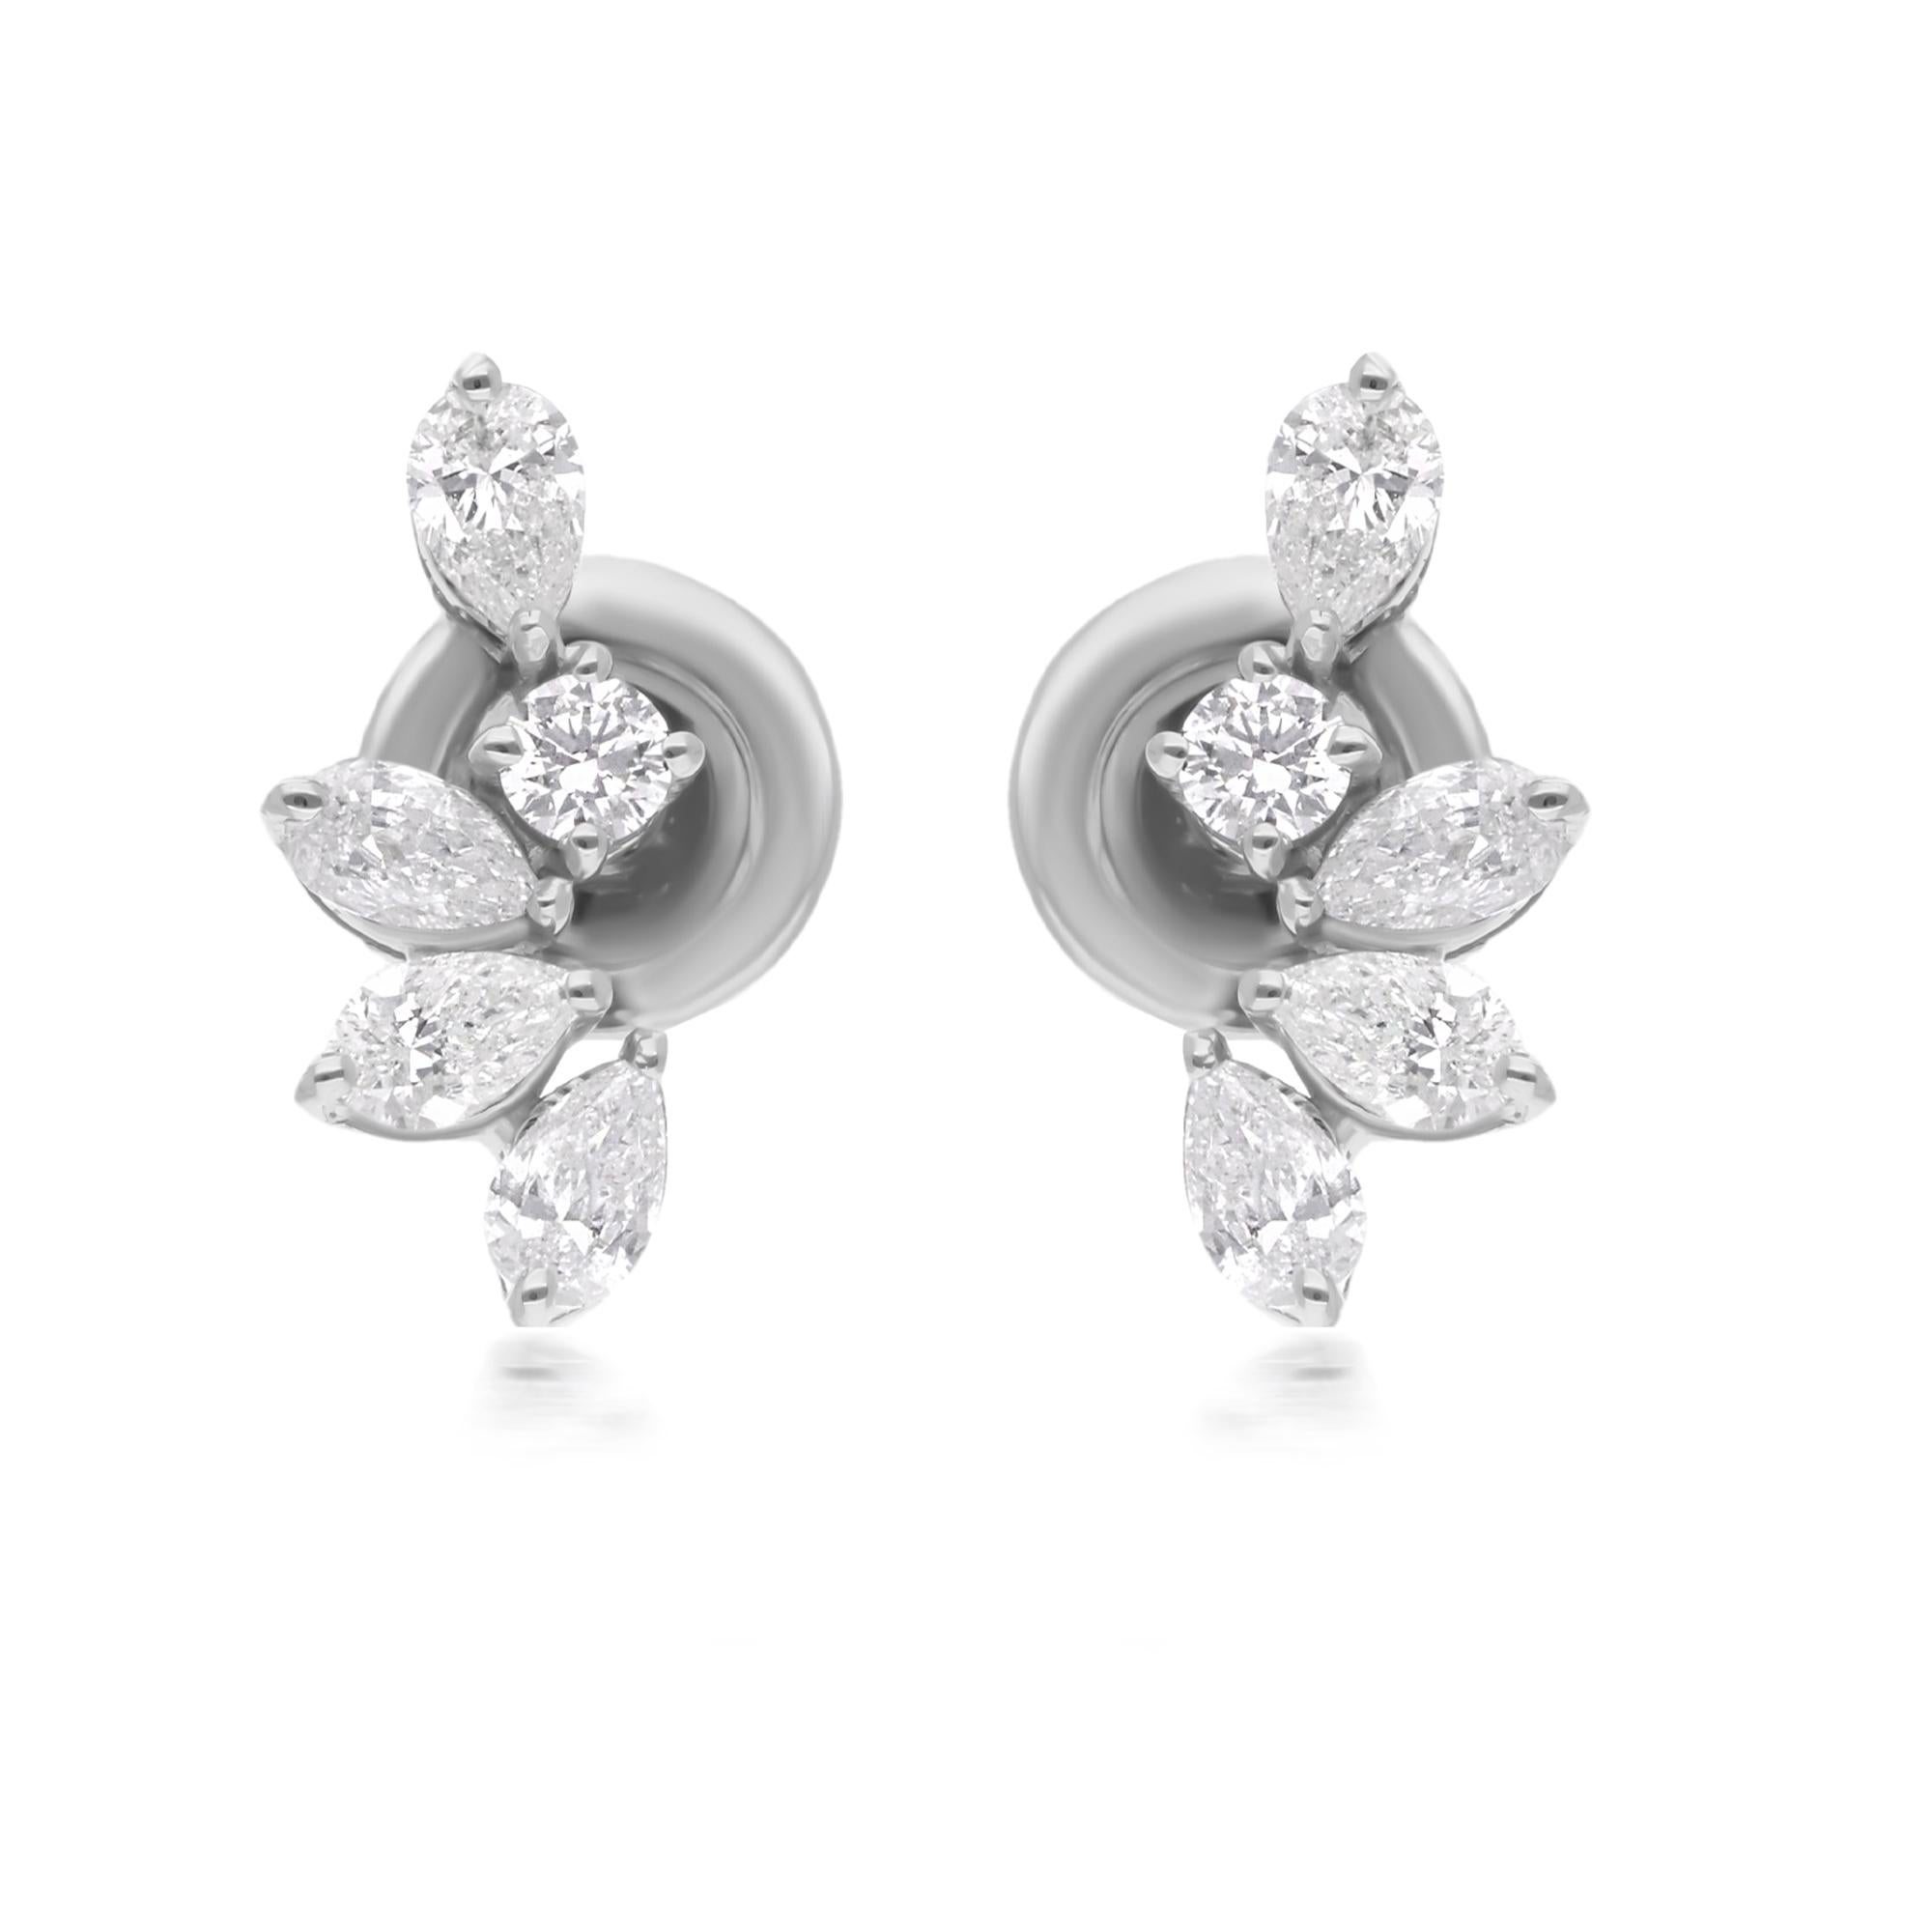 Each earring features a stunning pear-cut diamond, carefully selected for its exceptional quality and brilliance. The diamonds are set in lustrous 14 karat white gold settings, which enhance their natural beauty and radiance.

Item Code :-